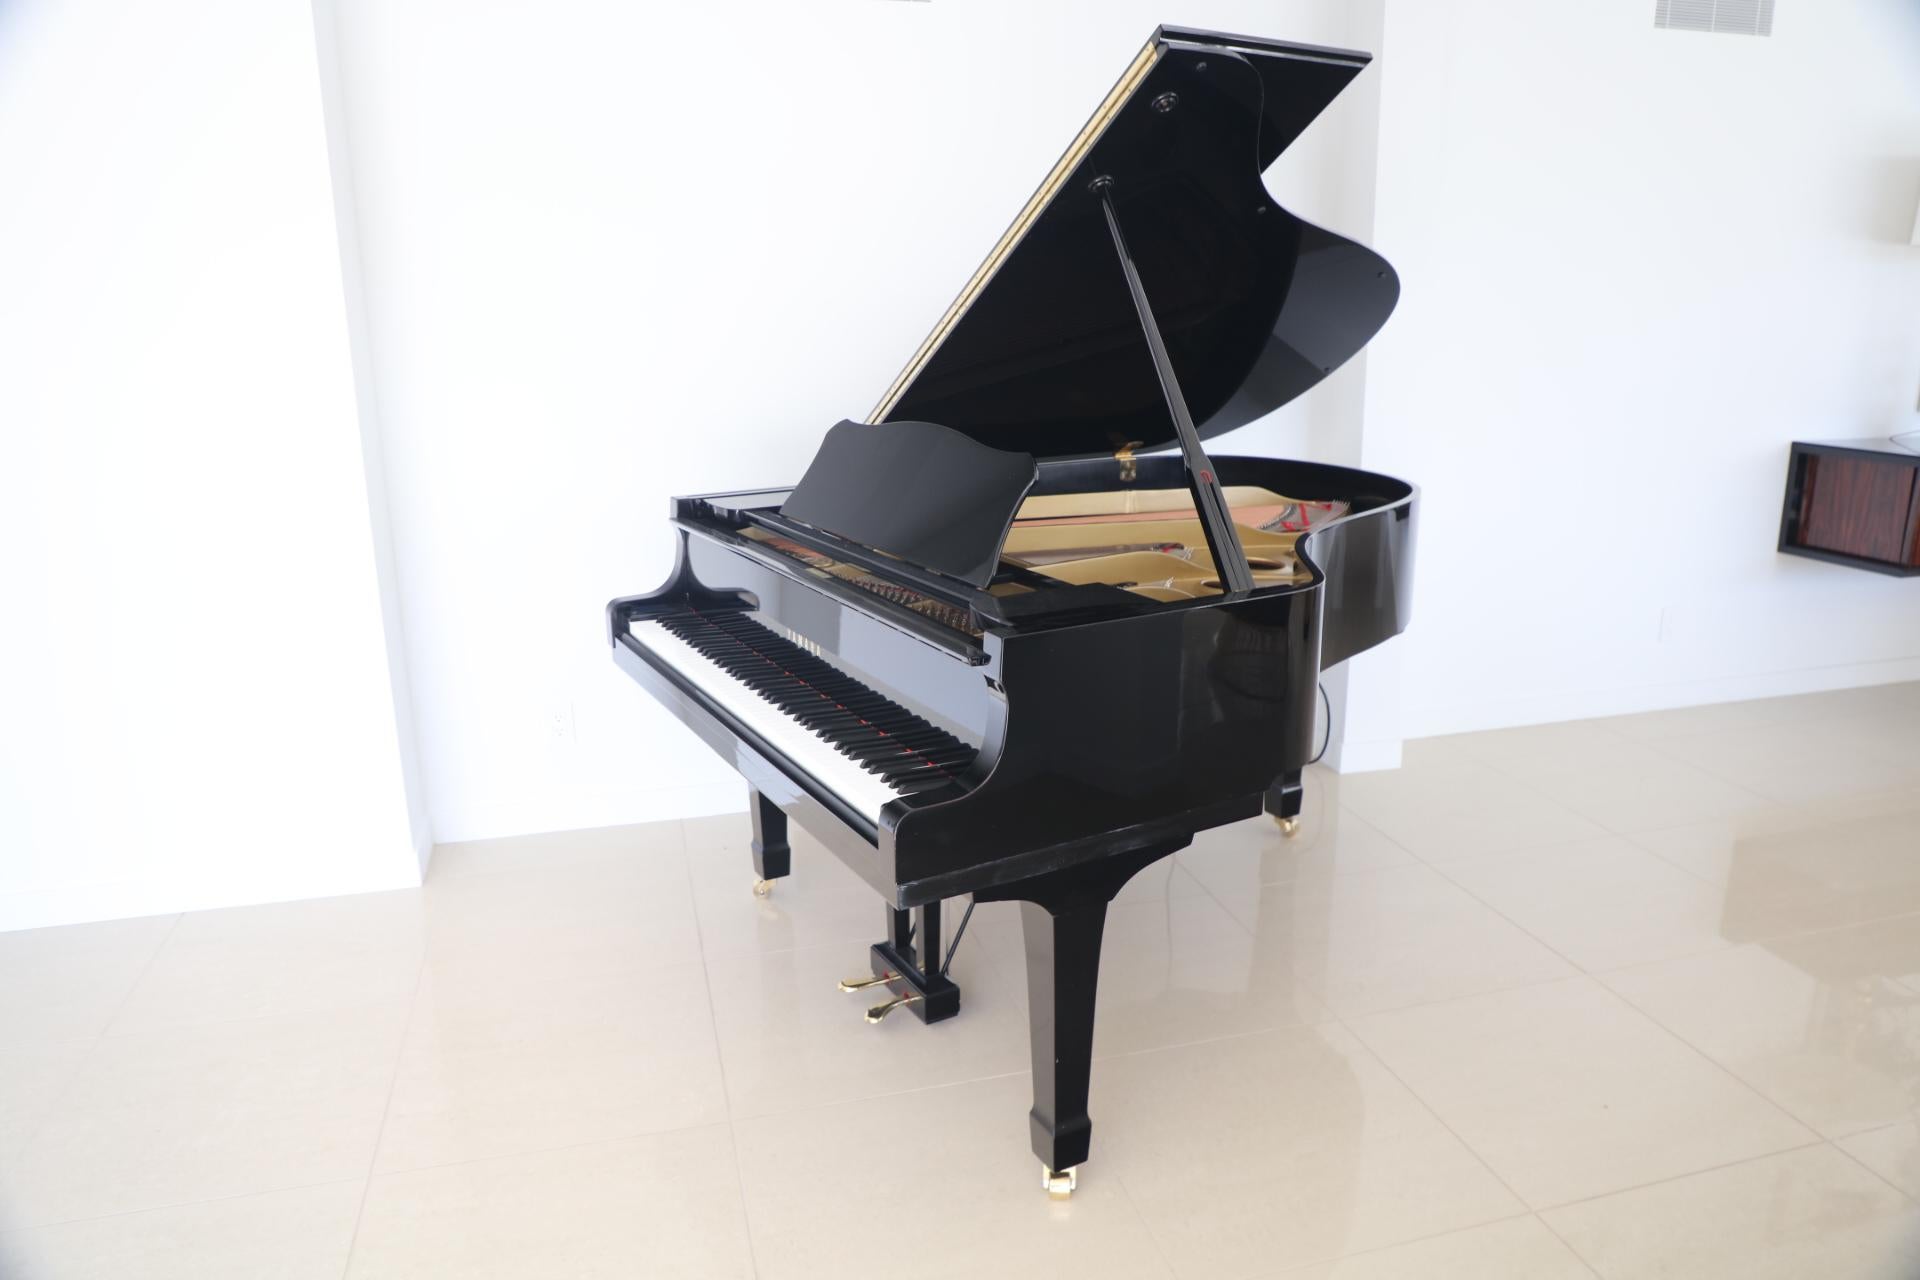 A completely refurbished Yamaha C3 Grand Piano, with a Pianodisc Prodigy player professionally installed. The Piano is in beautiful condition. On the gold plate the serial number is C3 B2849277.  I believe this dates the piano to approx 1979-1980